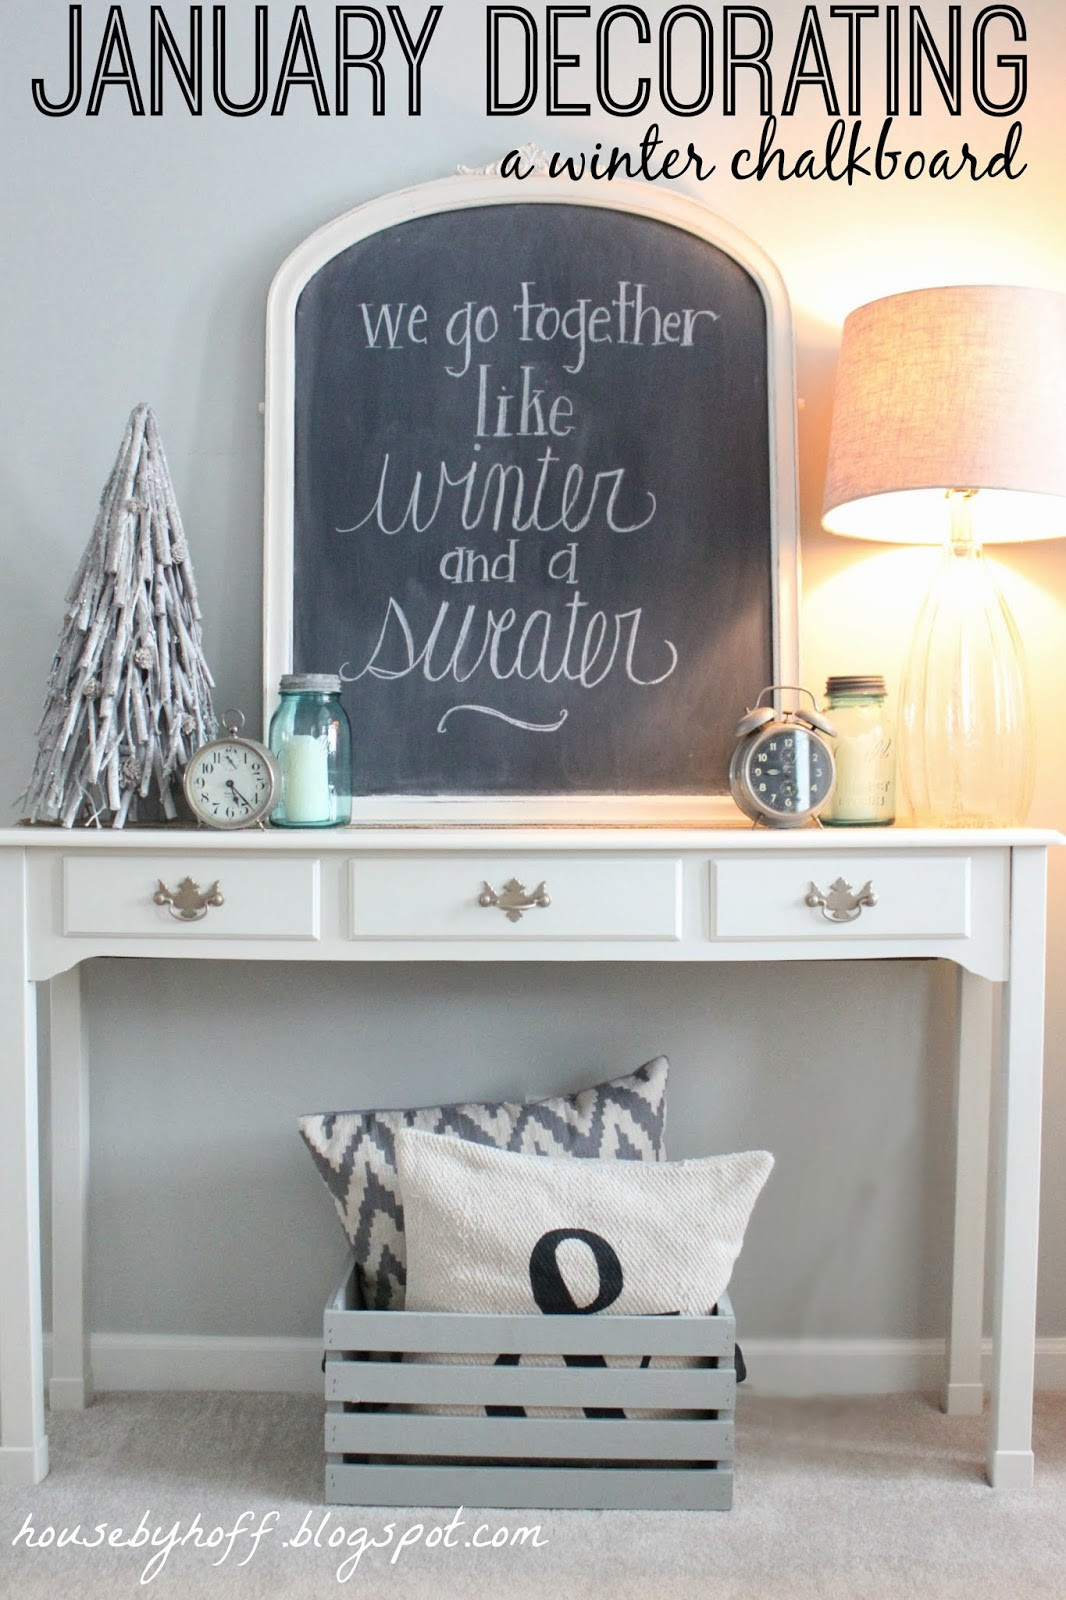 January Home Decorating Ideas
 Clean Cozy Neutral Winter Decorating Ideas